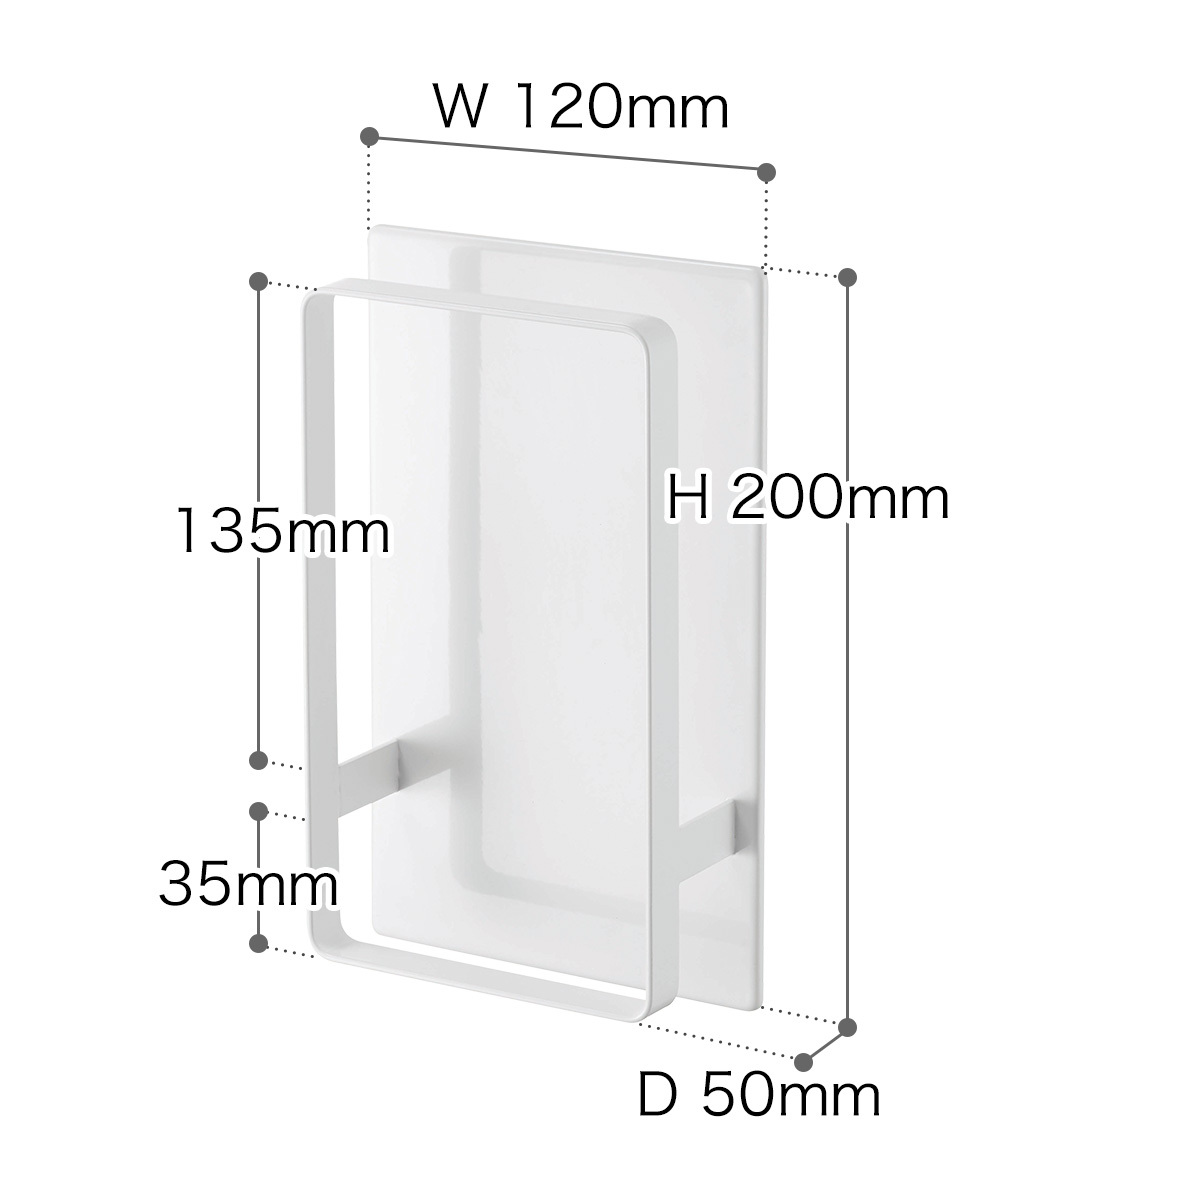 [ magnet two way bus room bath chair holder tower ] Yamazaki real industry tower bath chair storage bath chair bath chair hook magnet magnet rack 5395 5396